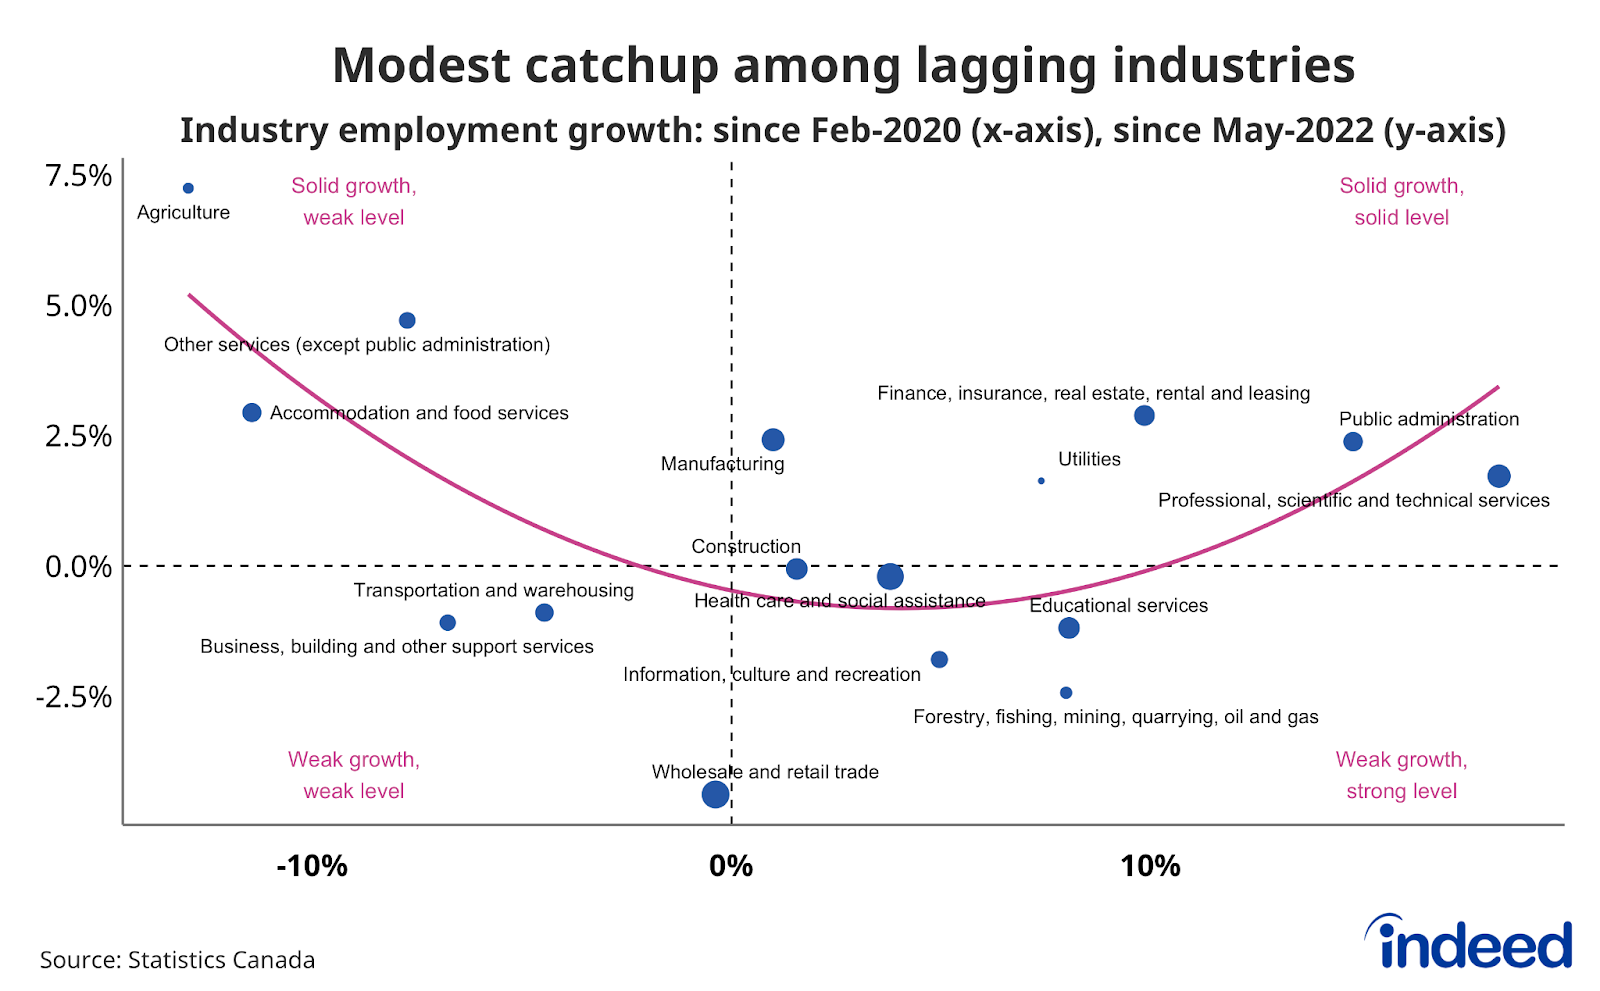 A scatter plot chart titled “Modest catchup among lagging industries” with each data point representing how employment in different industries stood in November 2022 compared to their pre-pandemic level on the x-axis, and six months earlier on the y-axis